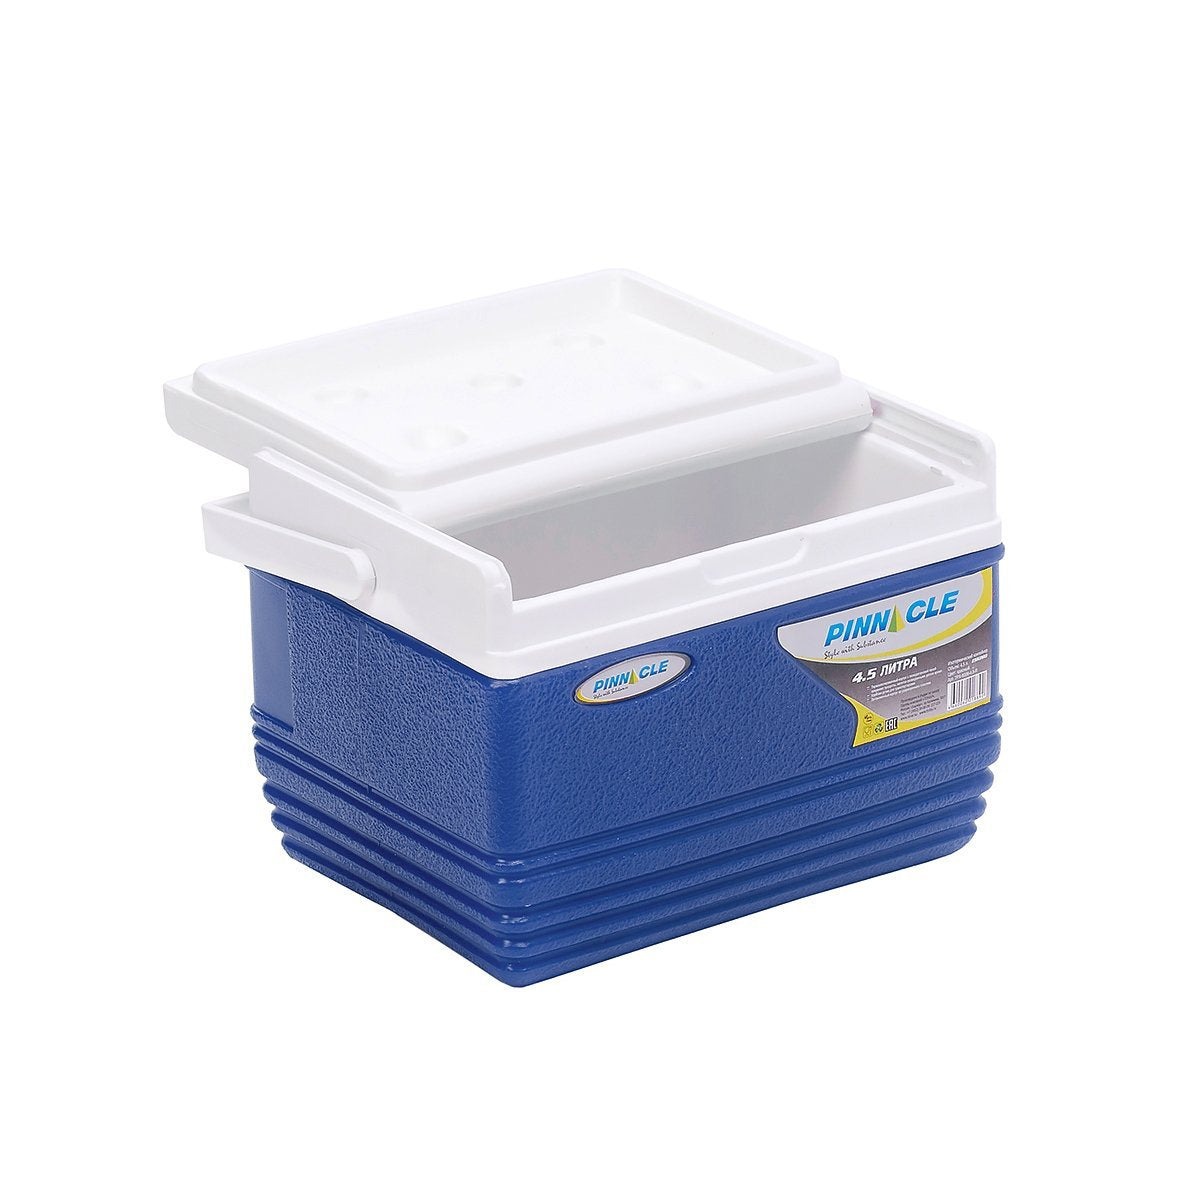 Eskimo Portable Hard-Sided Ice Chest for Camping, 4 qt, Navy Blue with a lid half opened